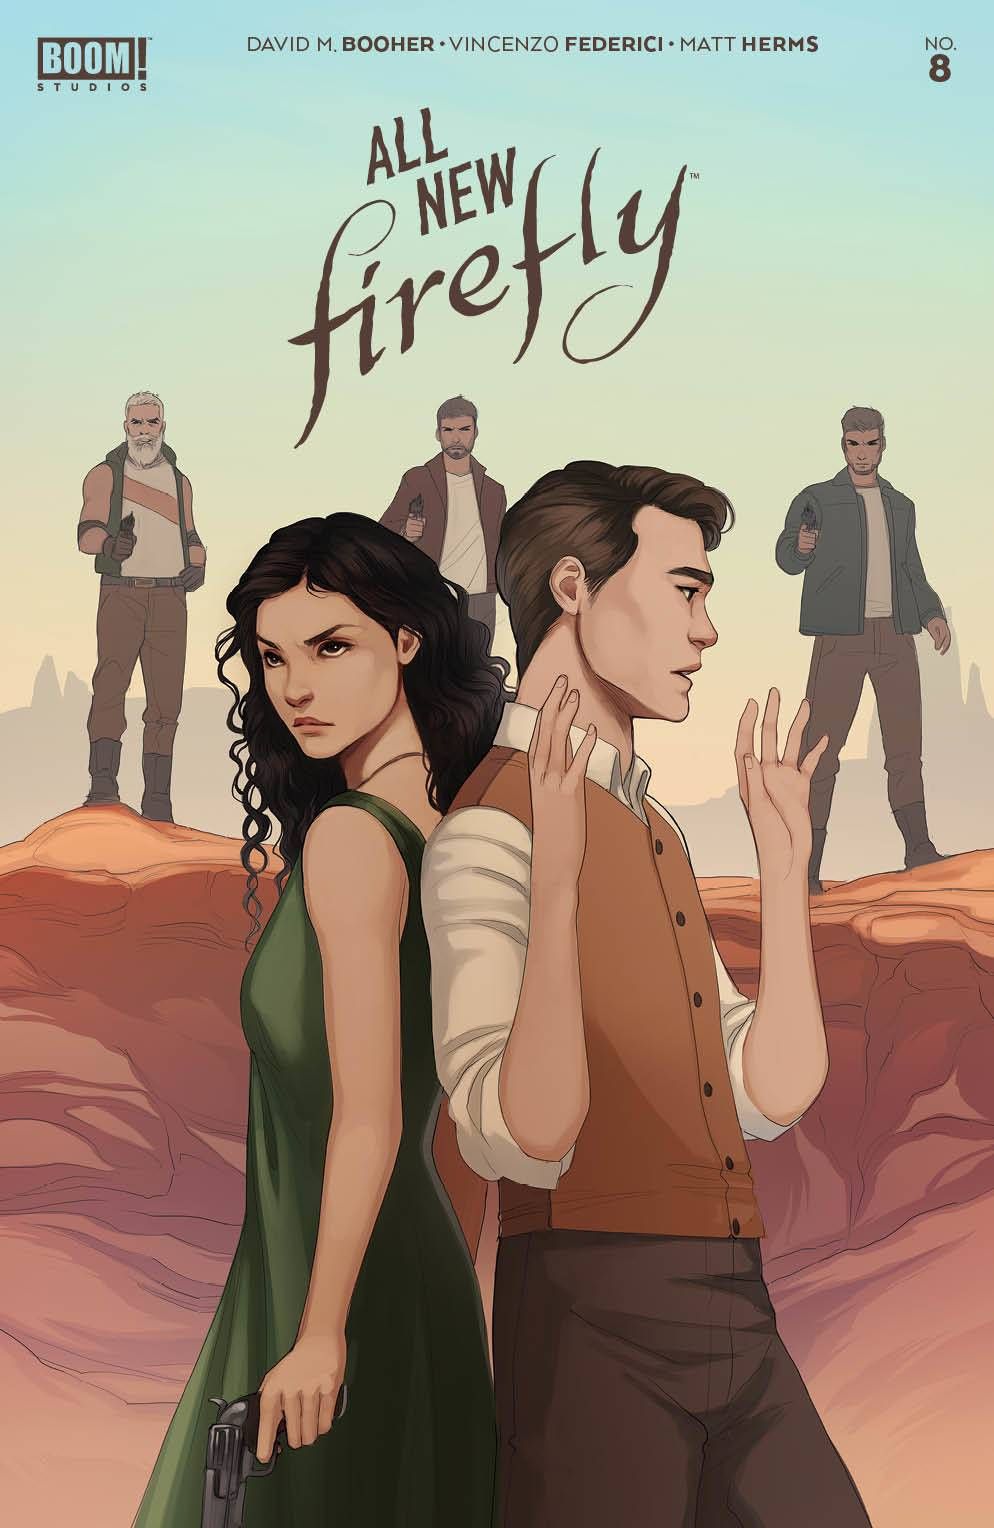 All New Firefly #8 Comic